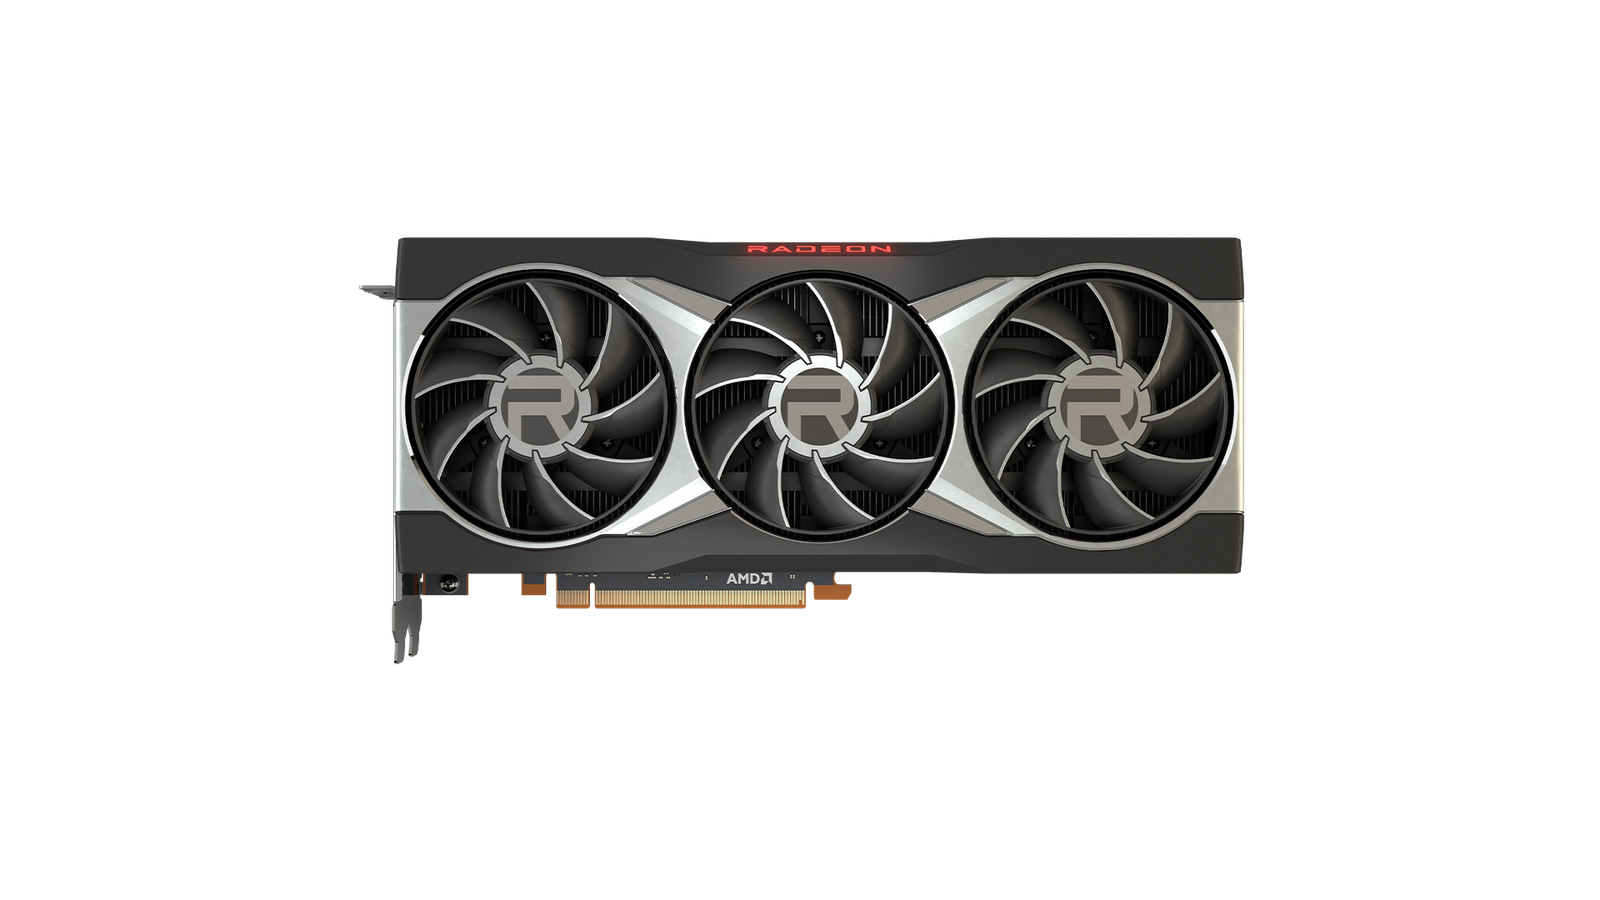 AMD Radeon RX 6900XT - The best AMD graphics card for video editing